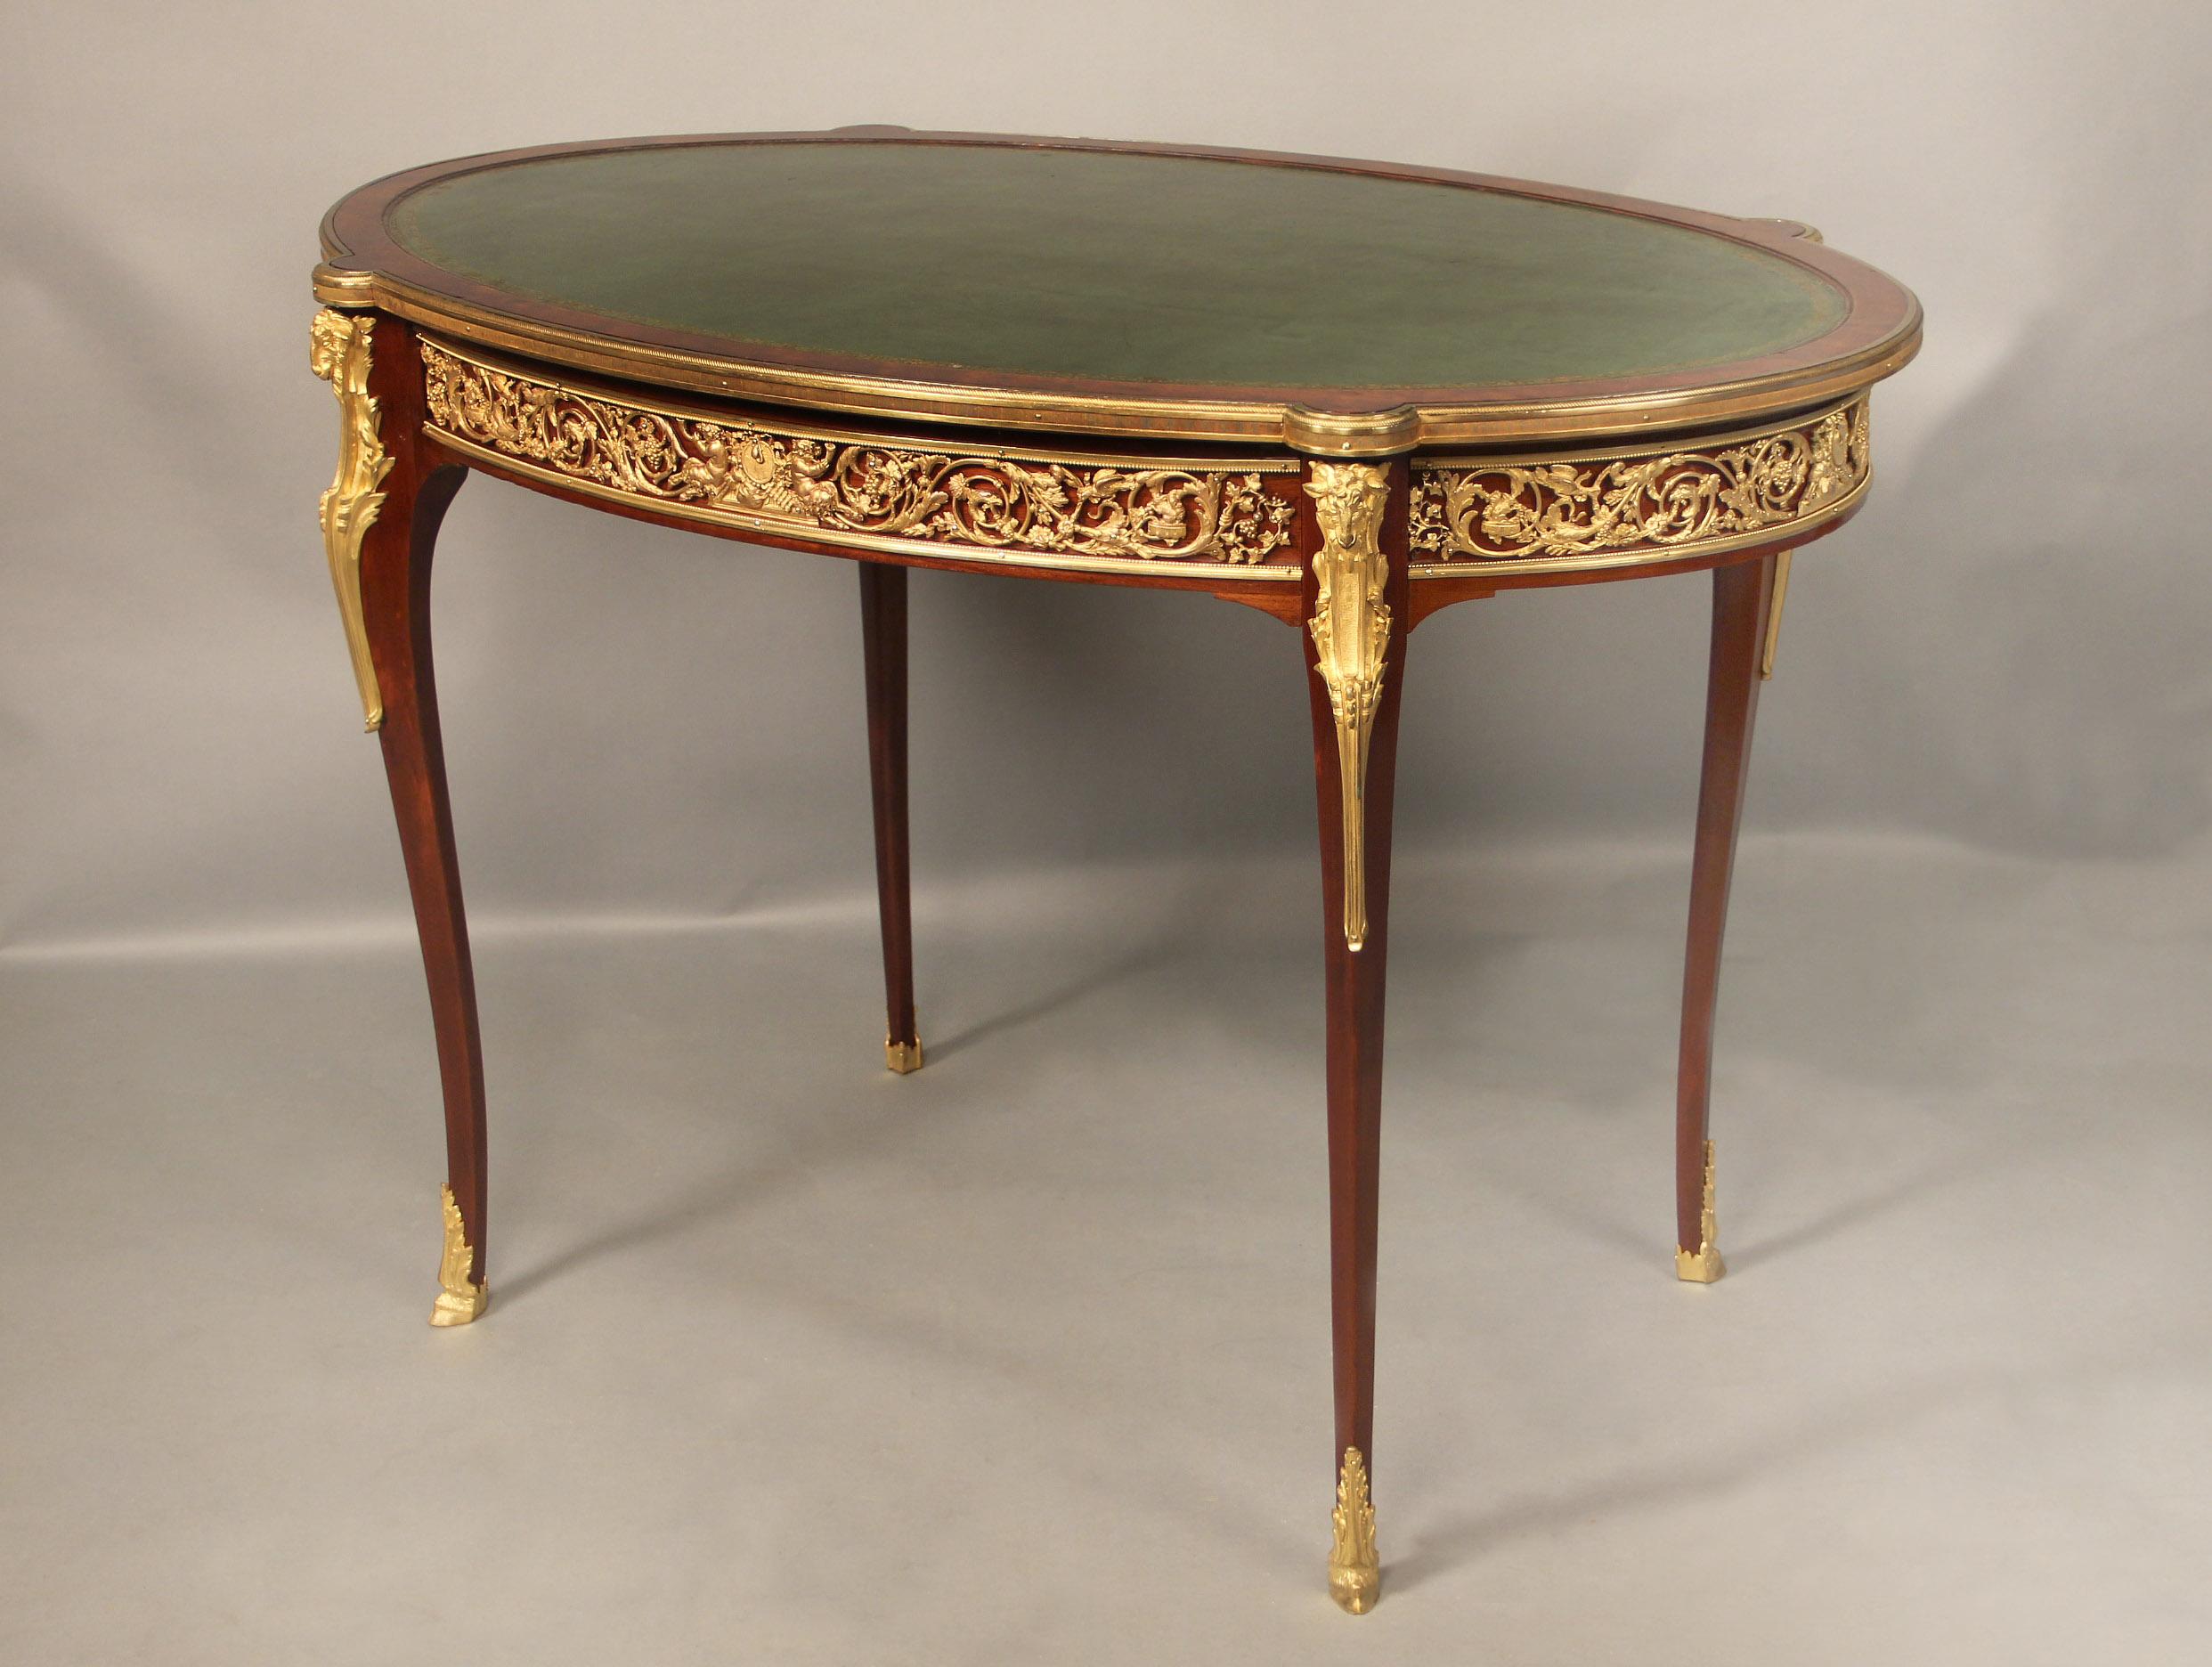 Fine Late 19th Century Gilt Bronze-Mounted Louis XV Style Table For Sale